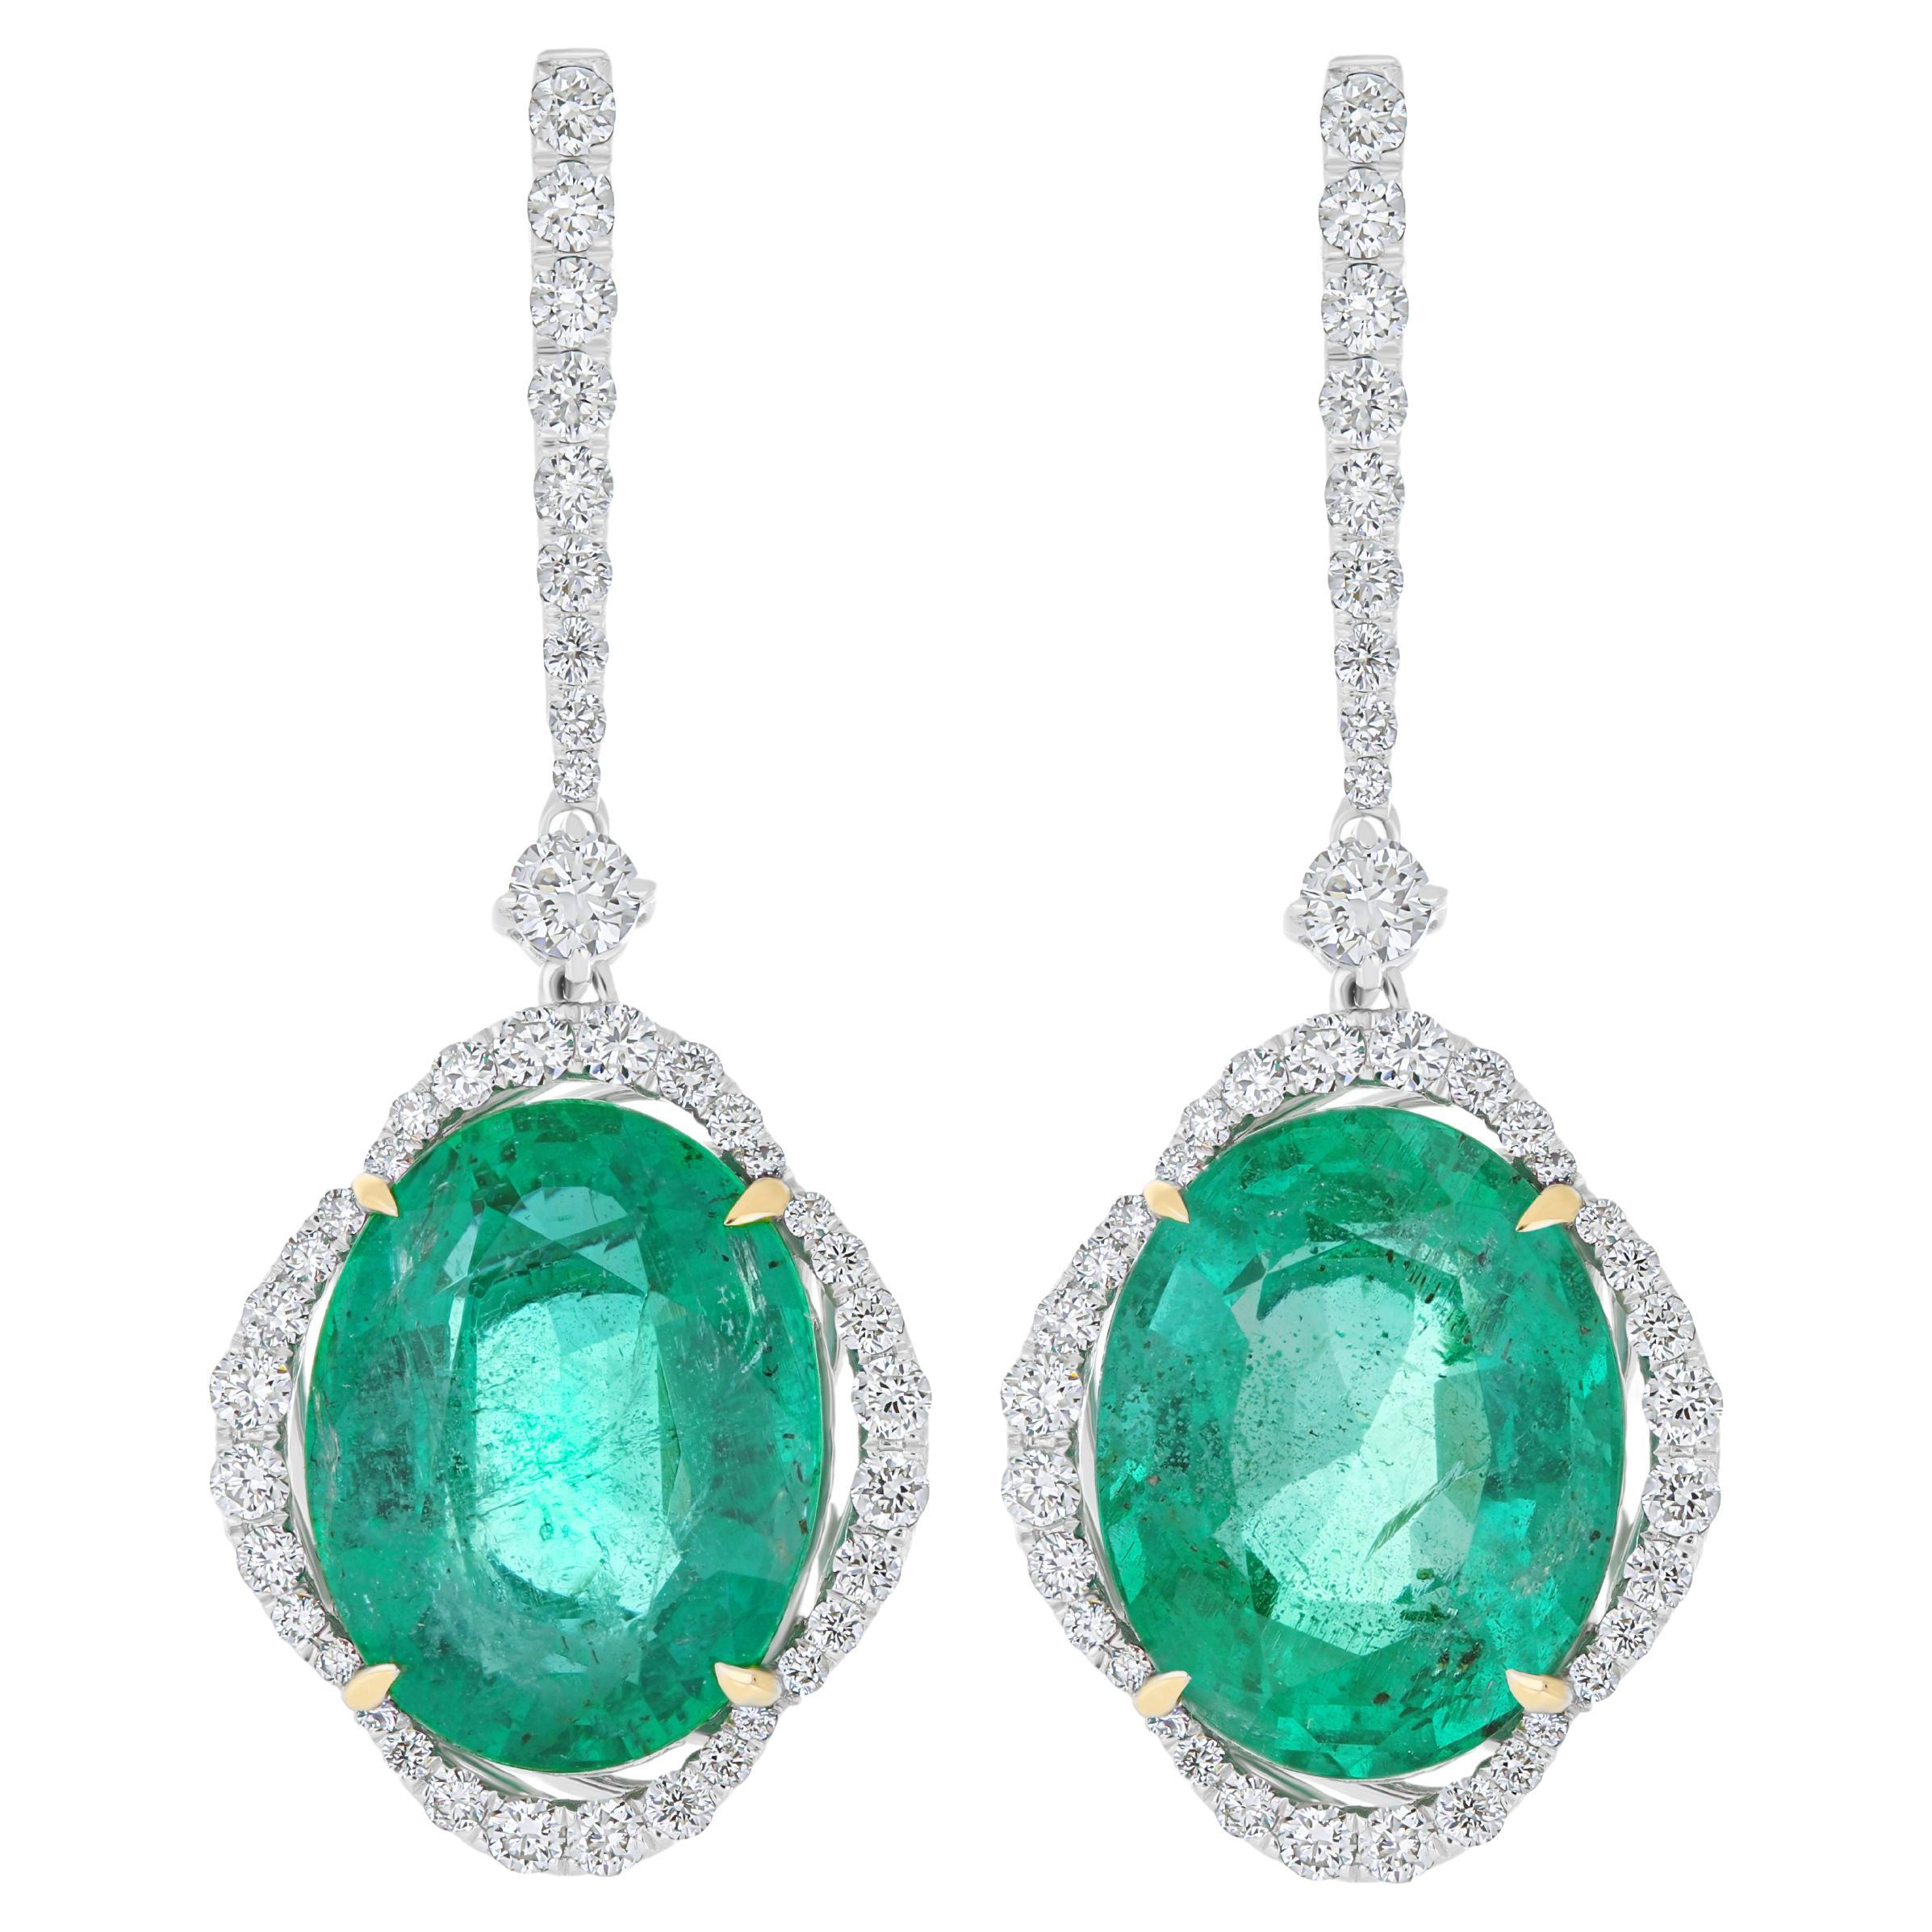  Emeralds and Daimond Drop Earrings in 18 Karat White Gold Hand-Craft Earring For Sale